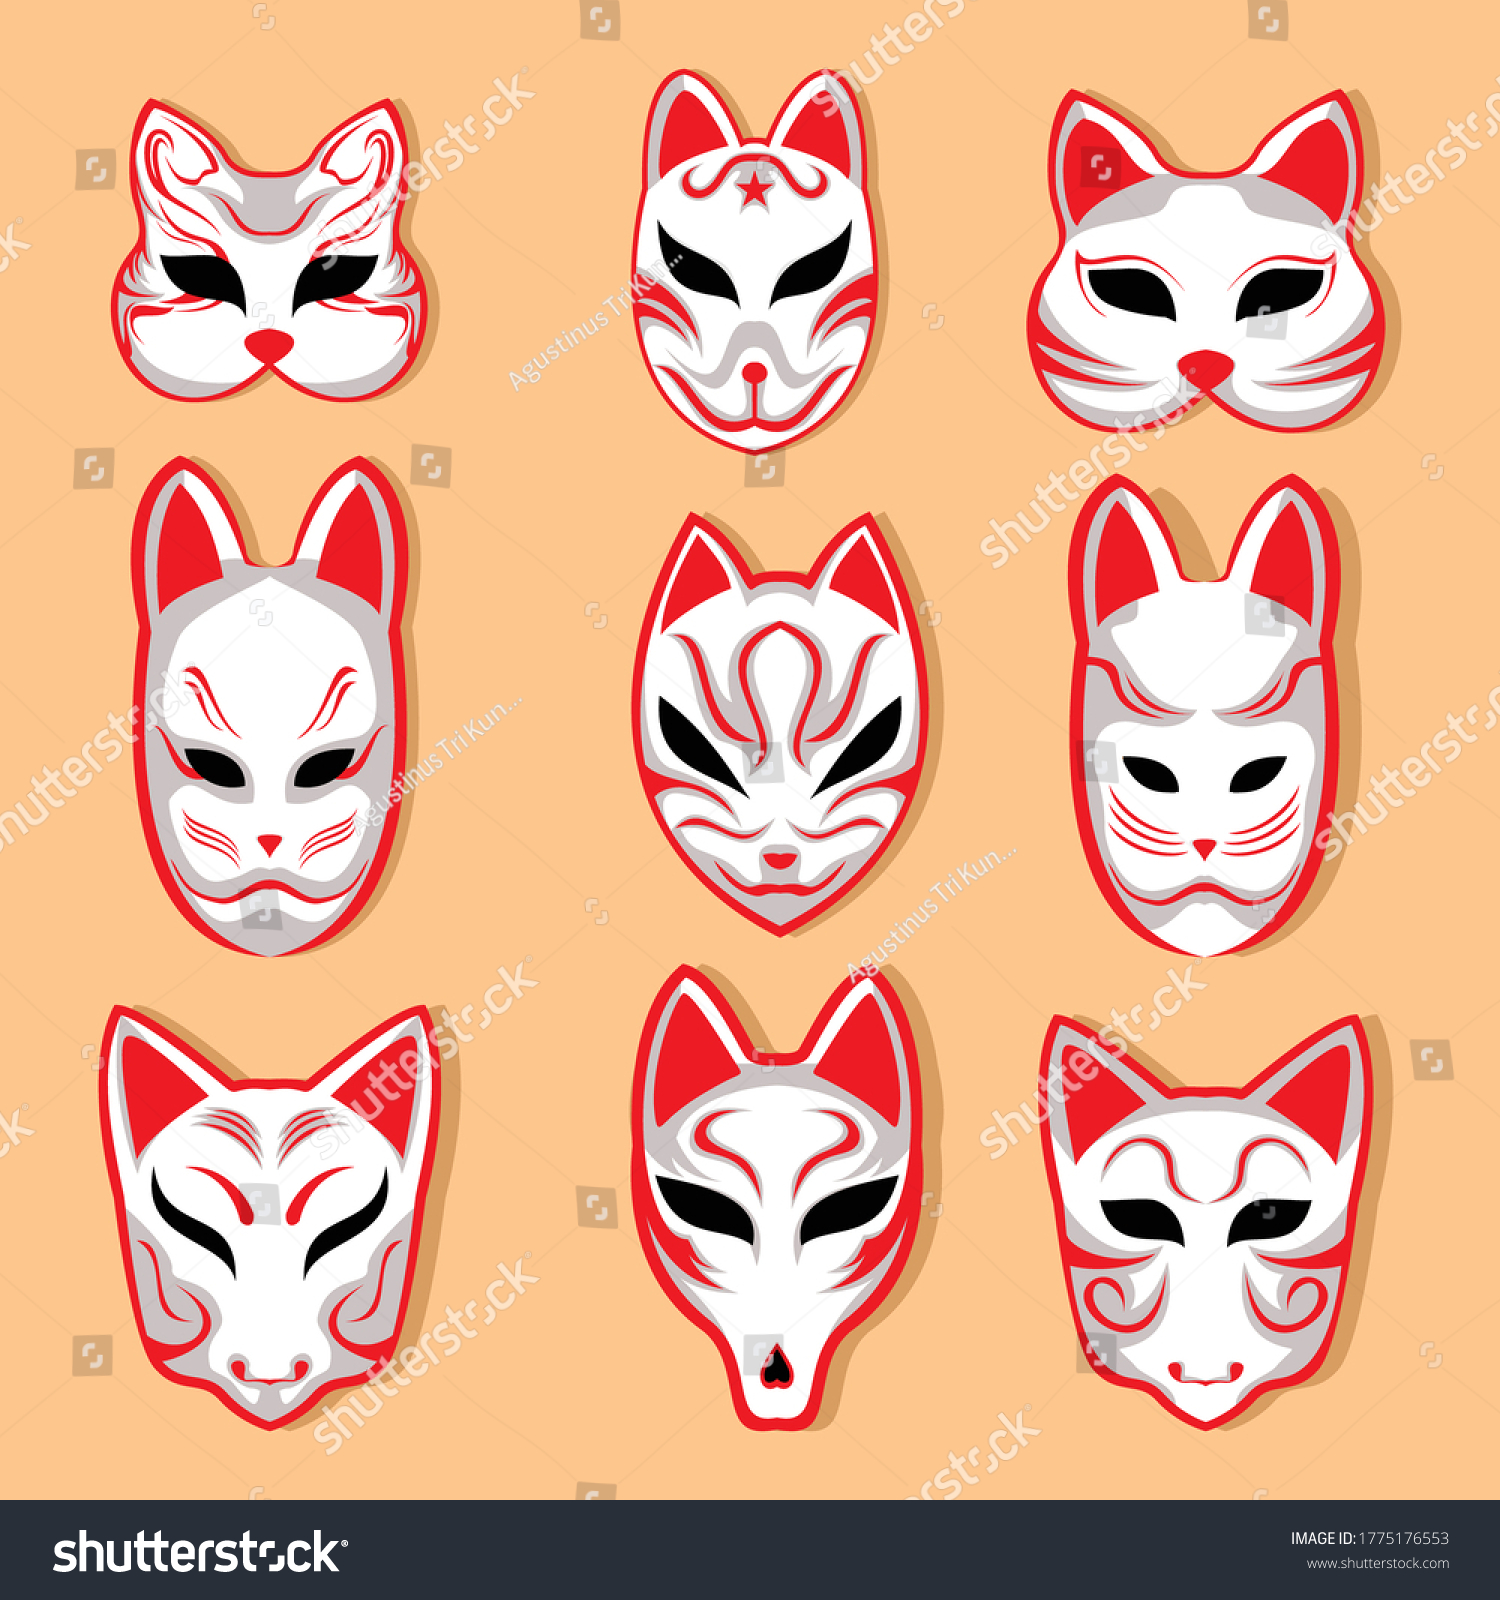 petroleum session Using a computer Japanese Demon Cat Masks Stock Vector (Royalty Free) 365555312 |  Shutterstock